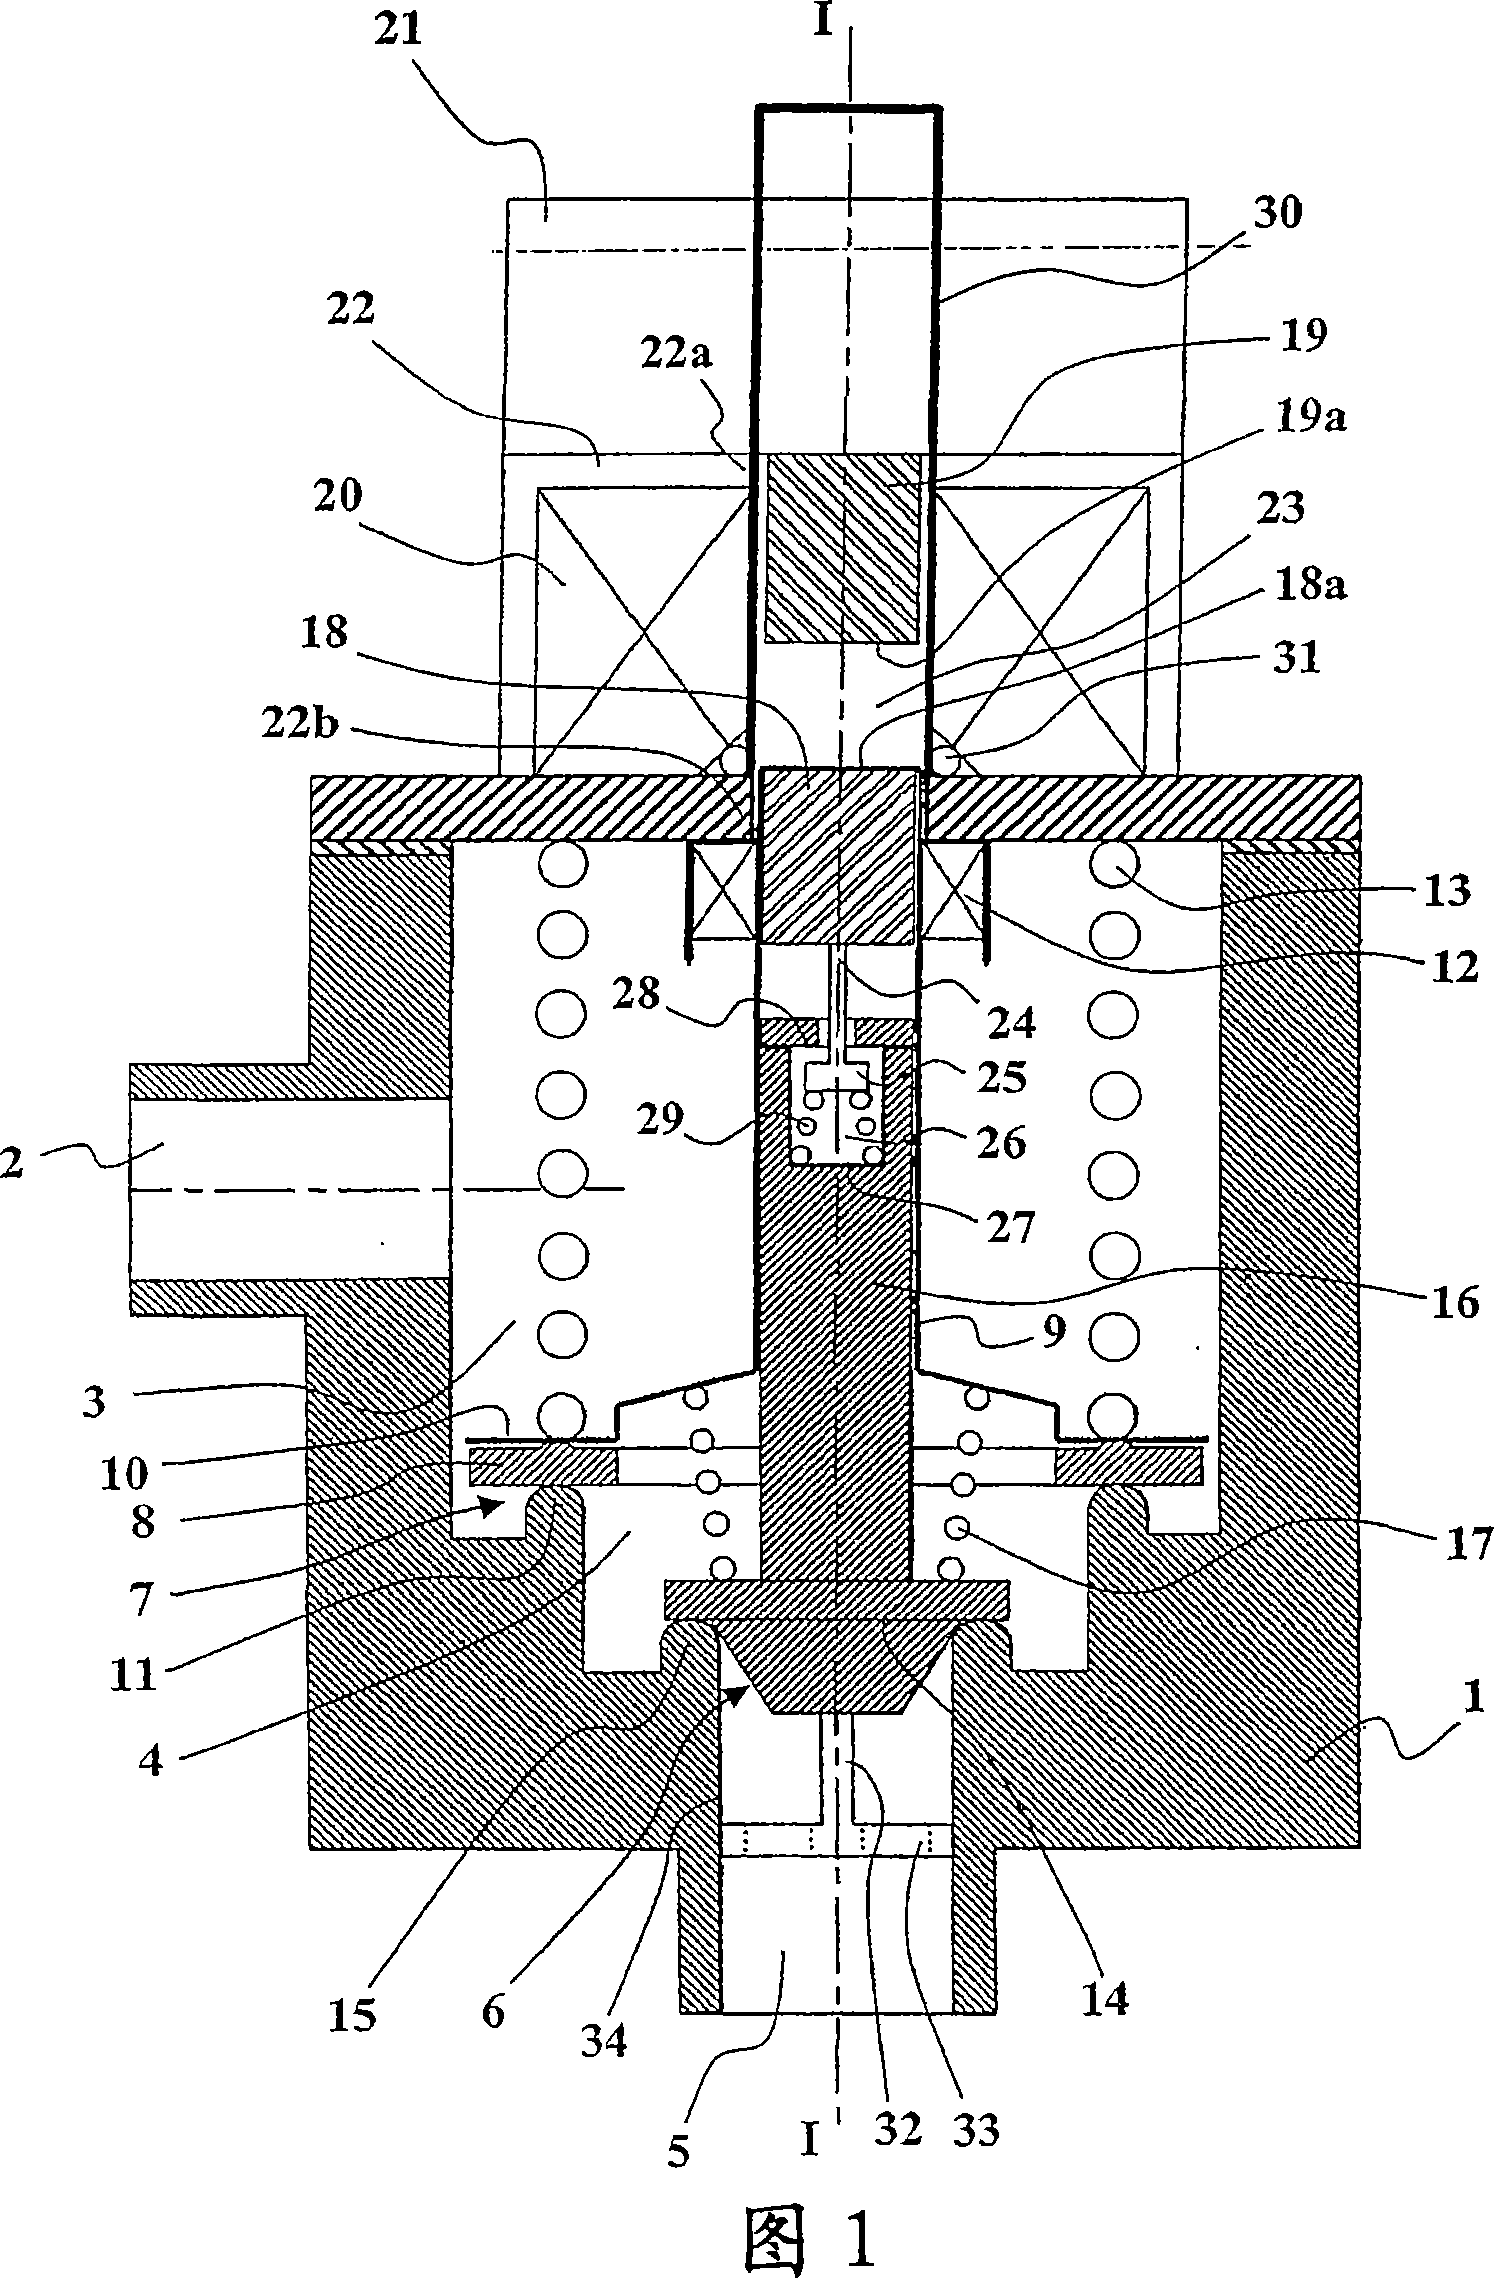 Double-safety regulating valve